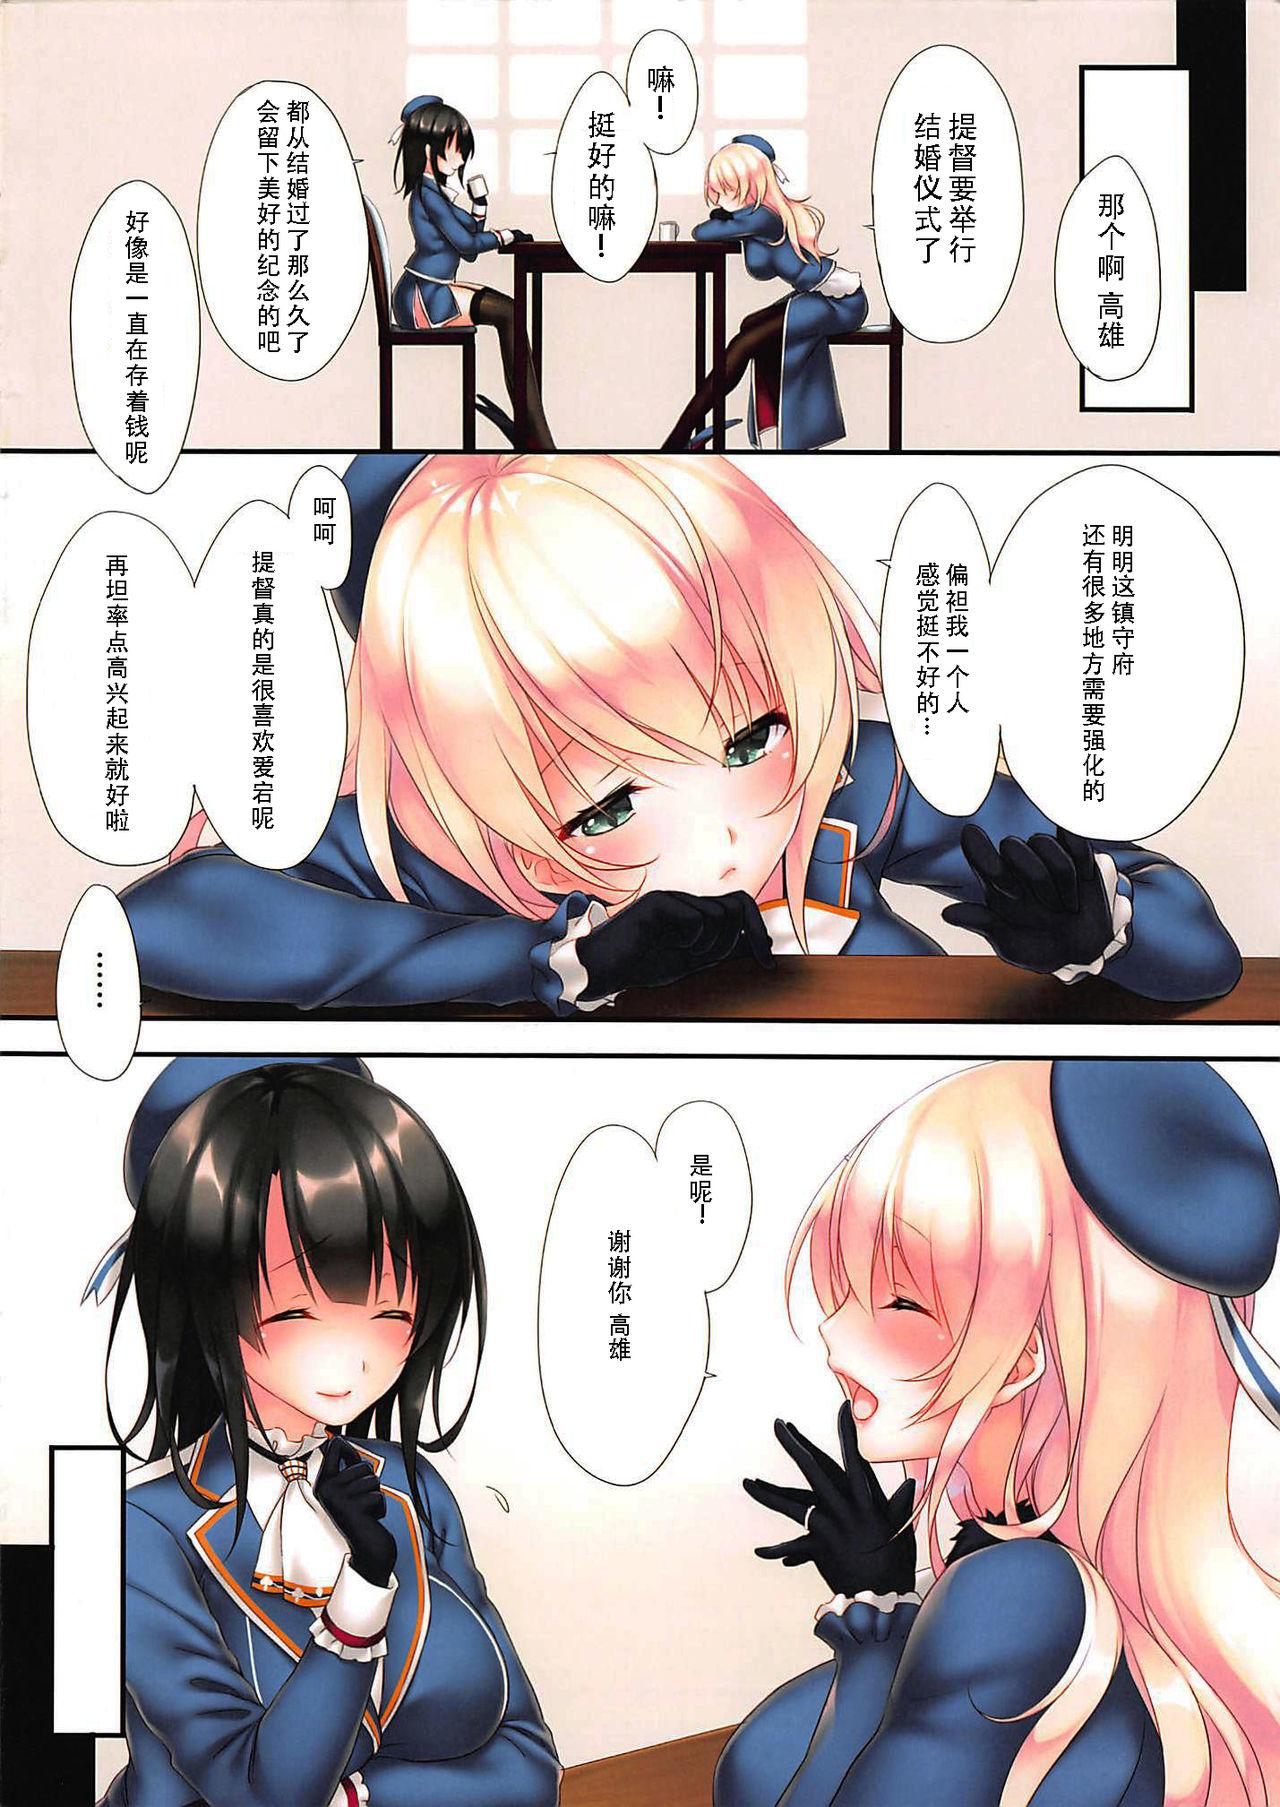 Sex LOVE MARRIAGE - Kantai collection India - Page 5